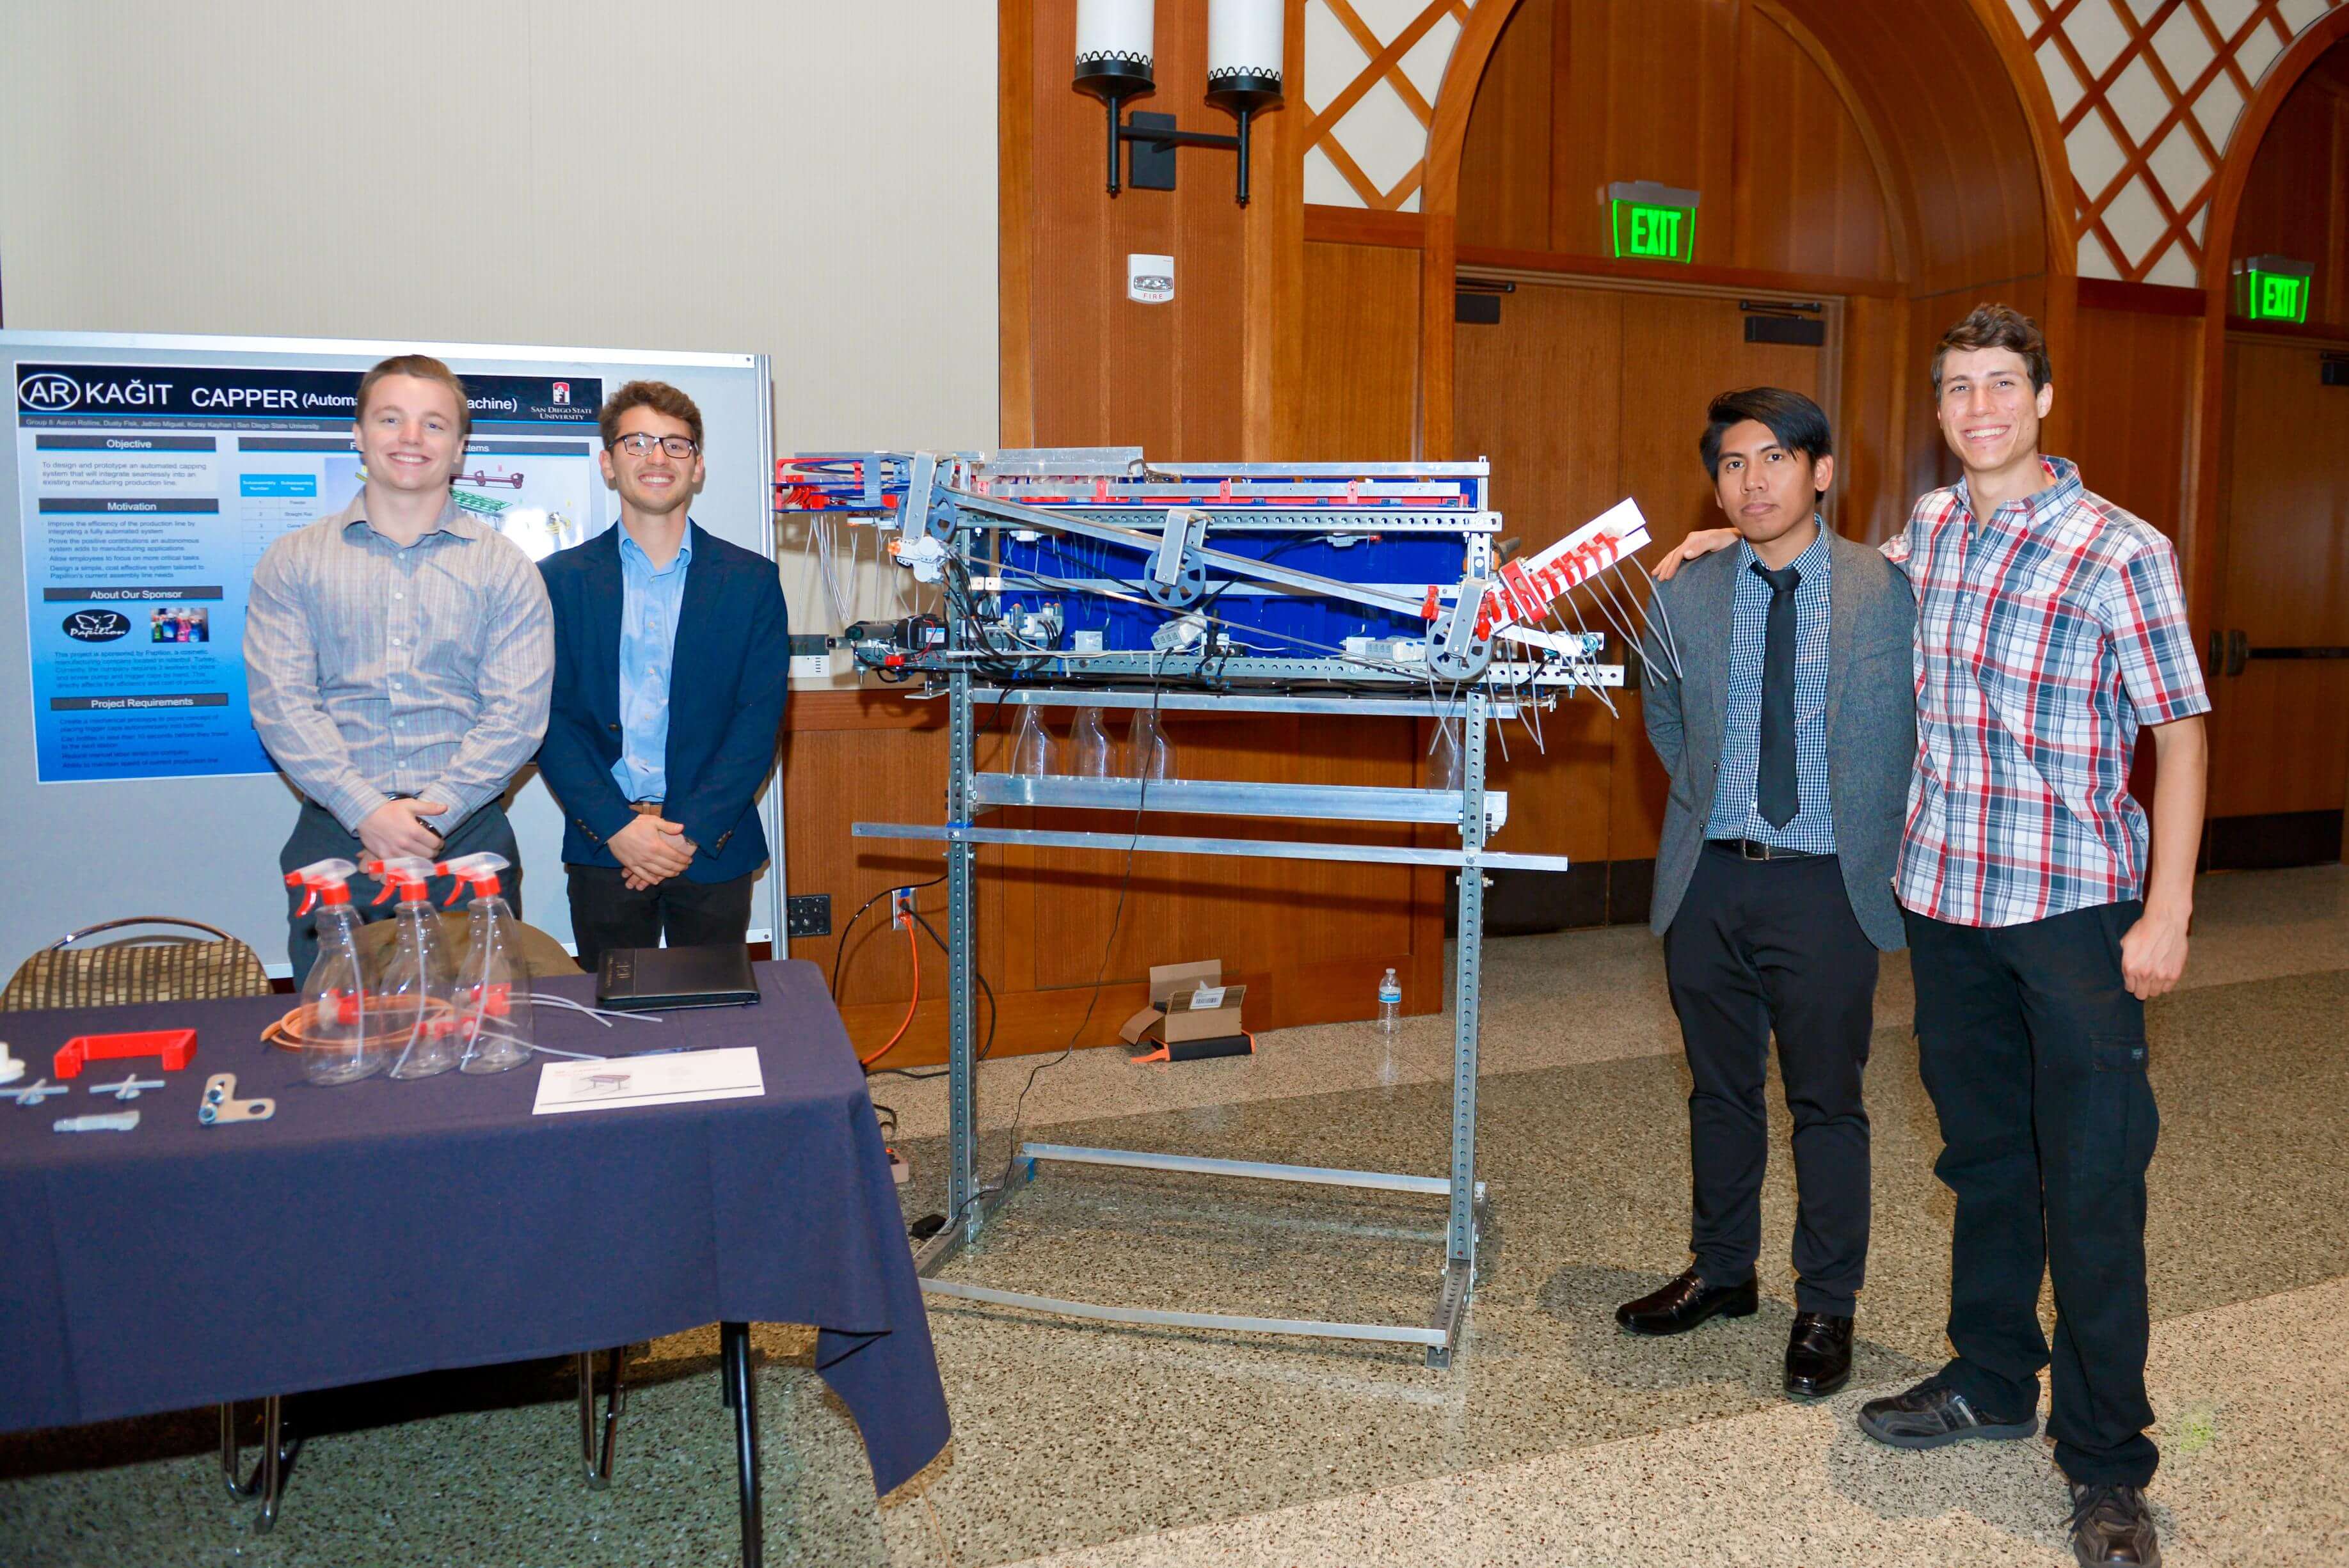 Team members and their prototype for an automated capping system.